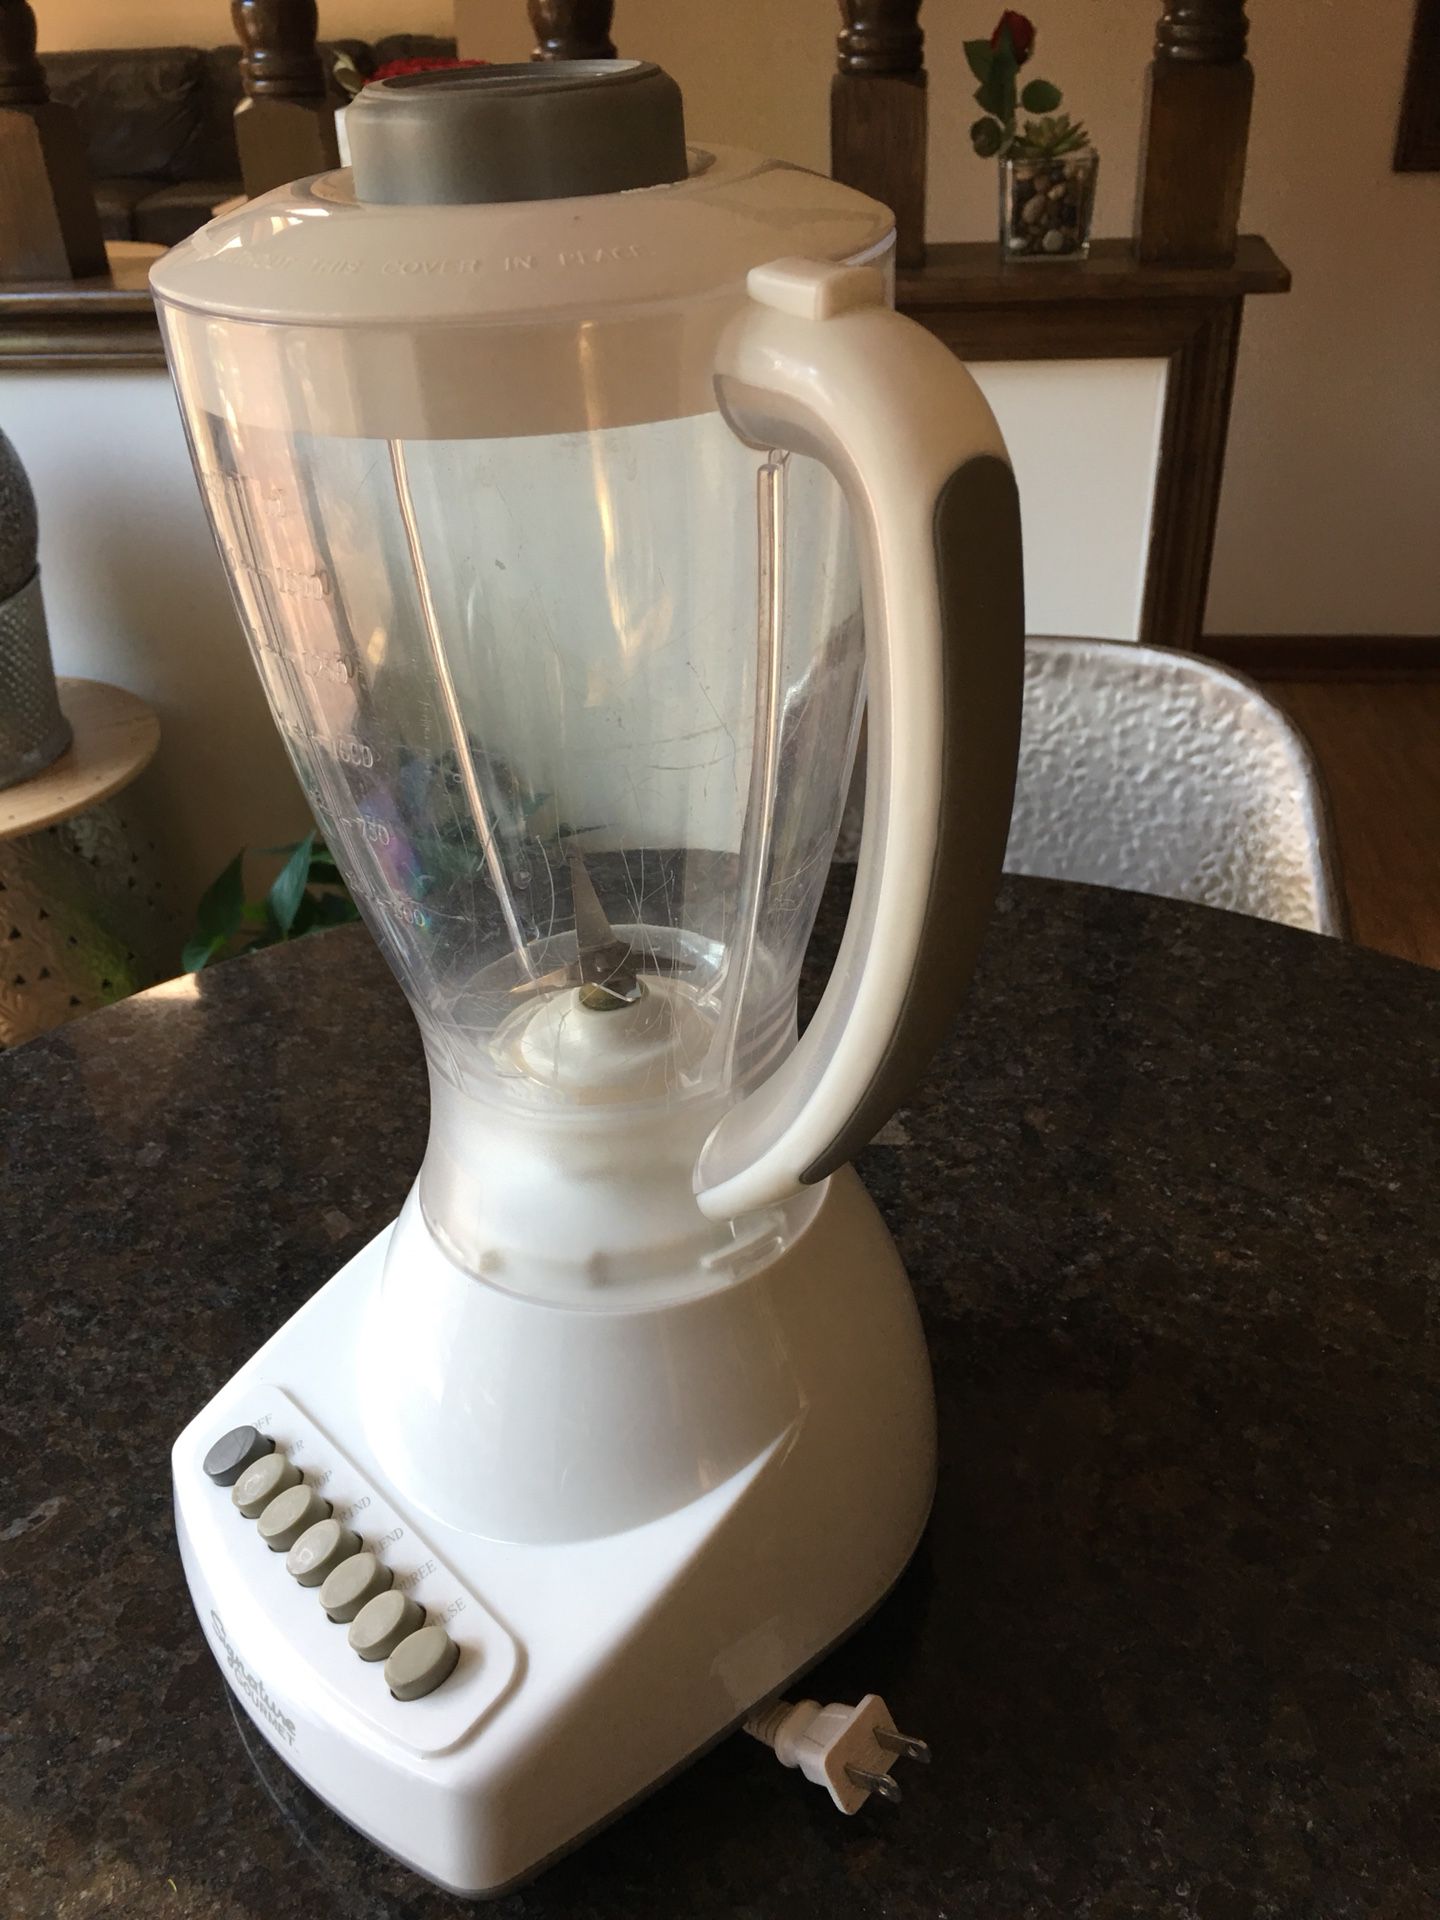 Handy Gourmet - RevMix For smoothies and shakes on the go for Sale in  Urbandale, IA - OfferUp